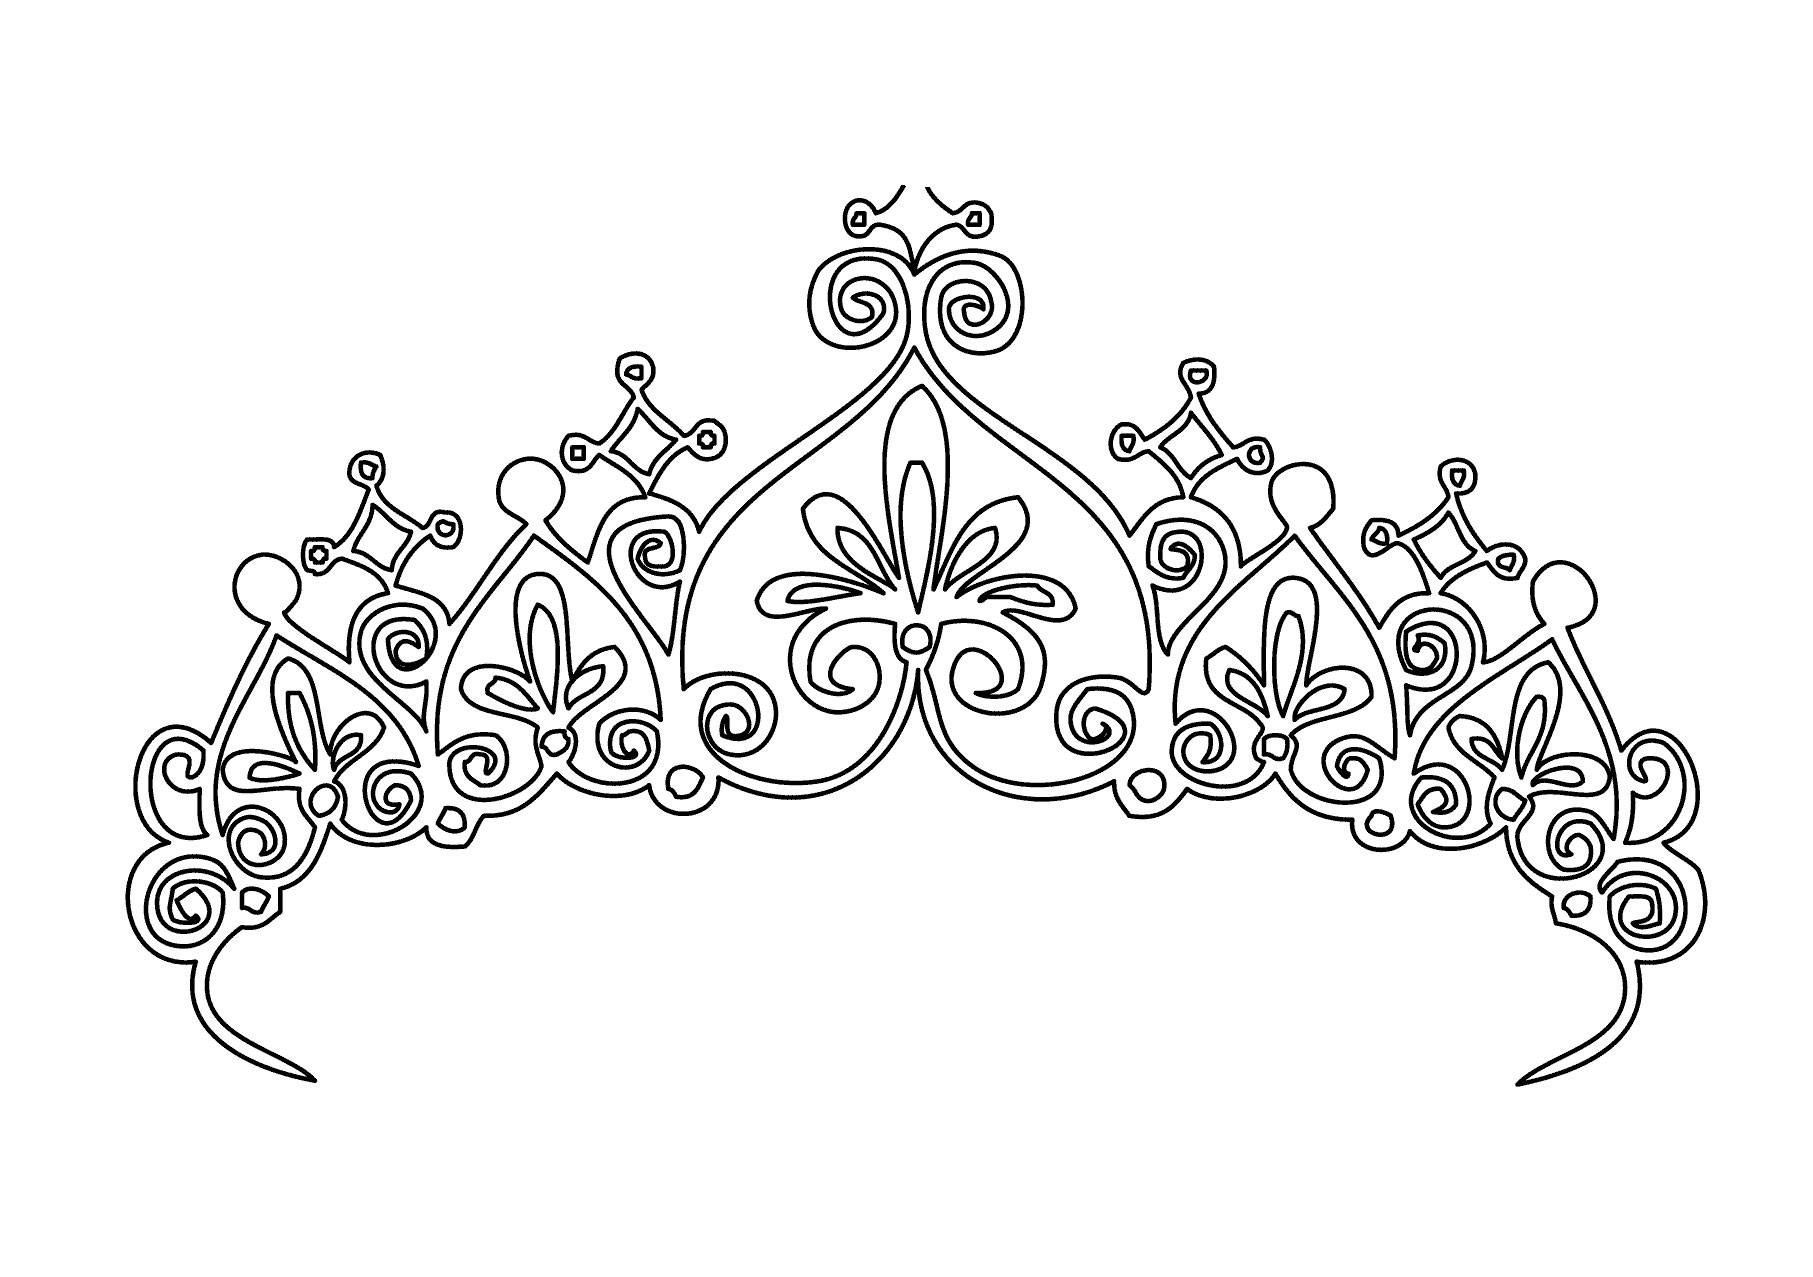 Princess Crown Coloring Pages 14 with Princess Crown Coloring Pages